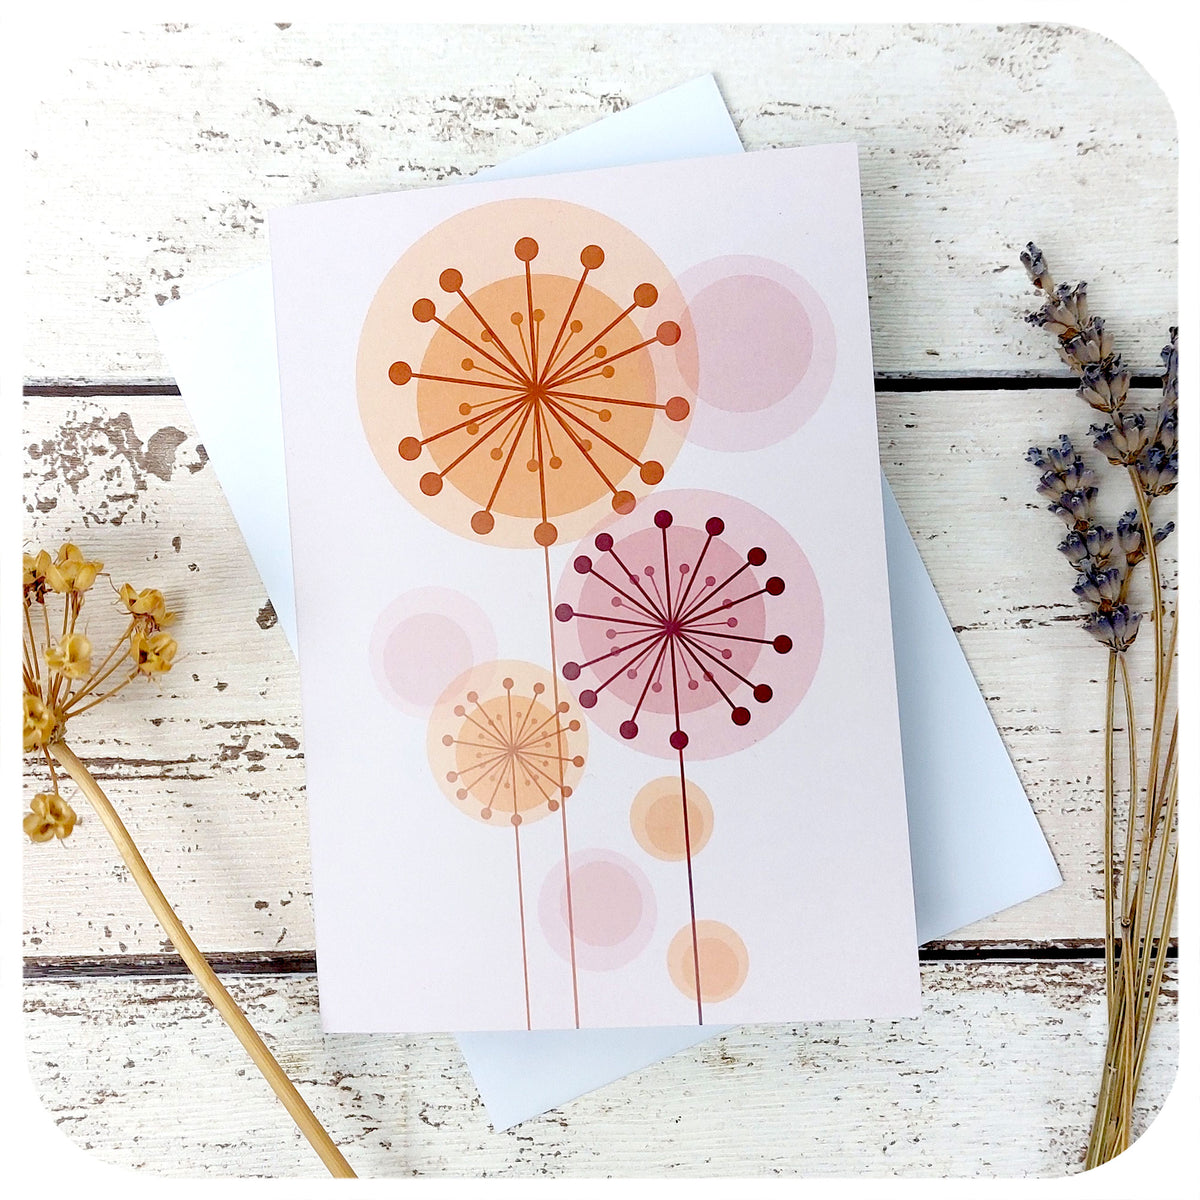 Retro Alliums Blank Greetings Card with white envelope on table with dried flowers | The Inkabilly Emporium